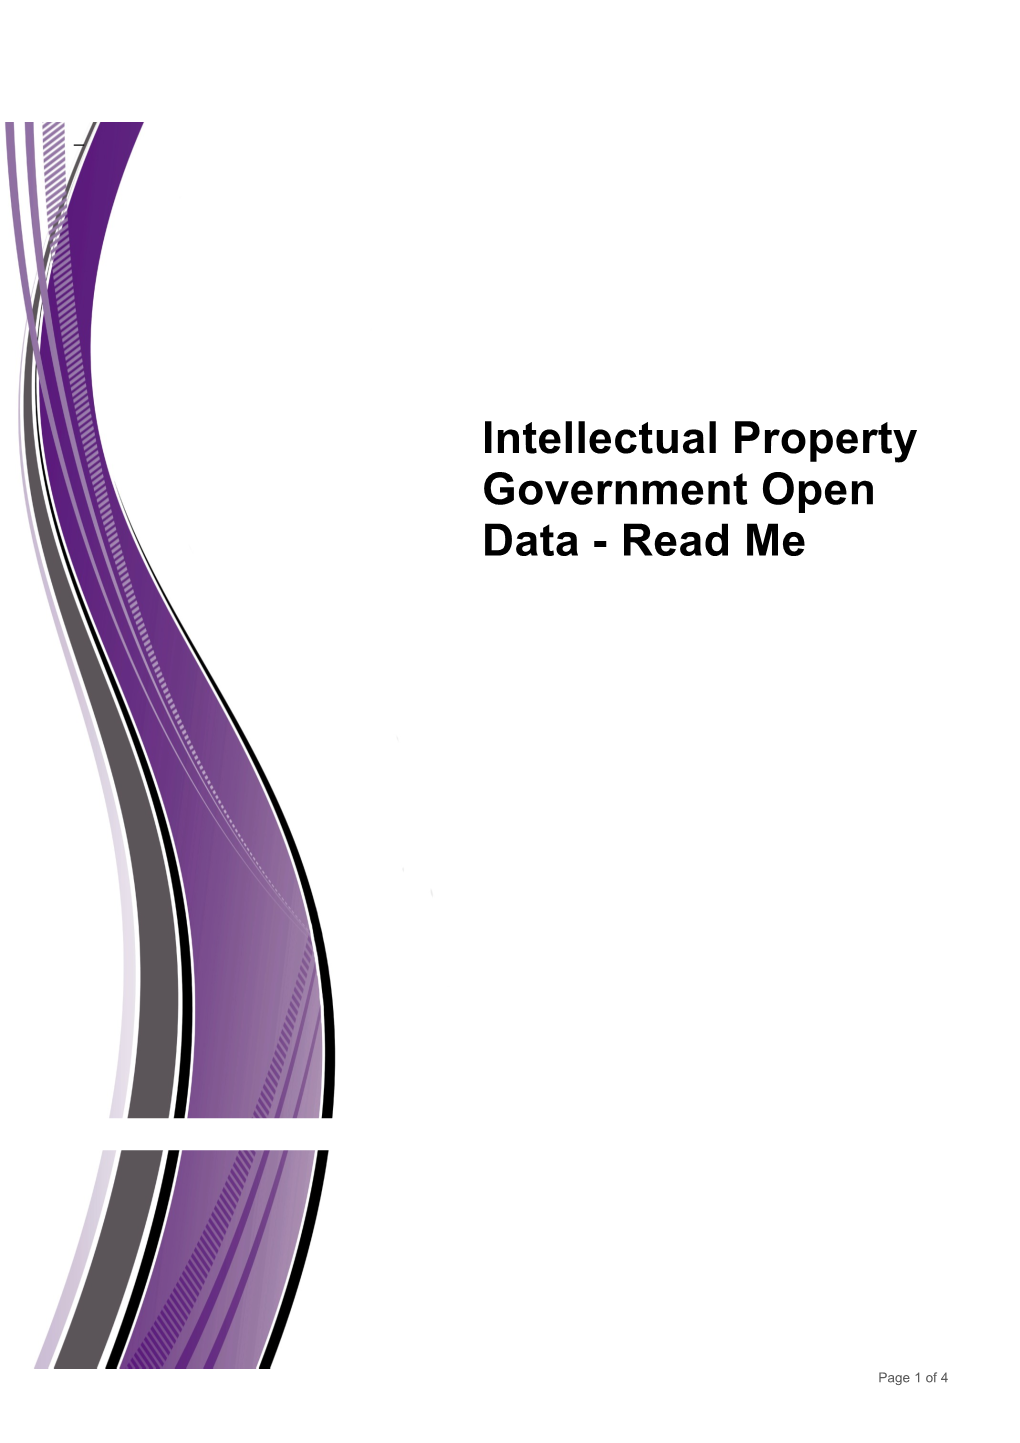 Intellectual Property Government Open Data - Read Me